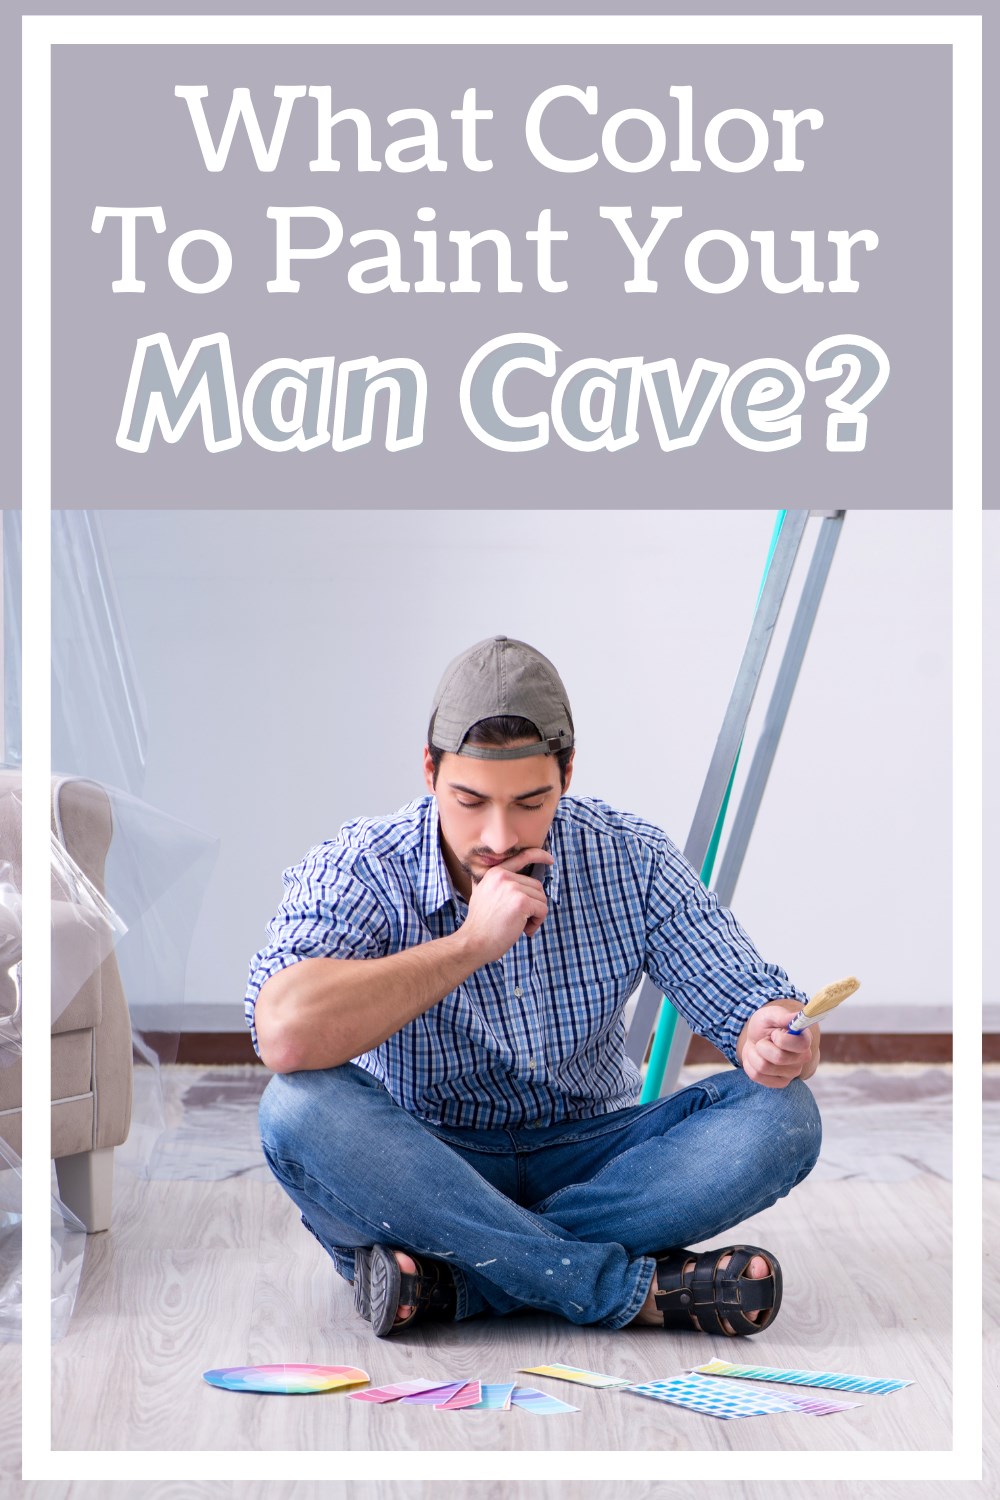 What color to paint your man cave?